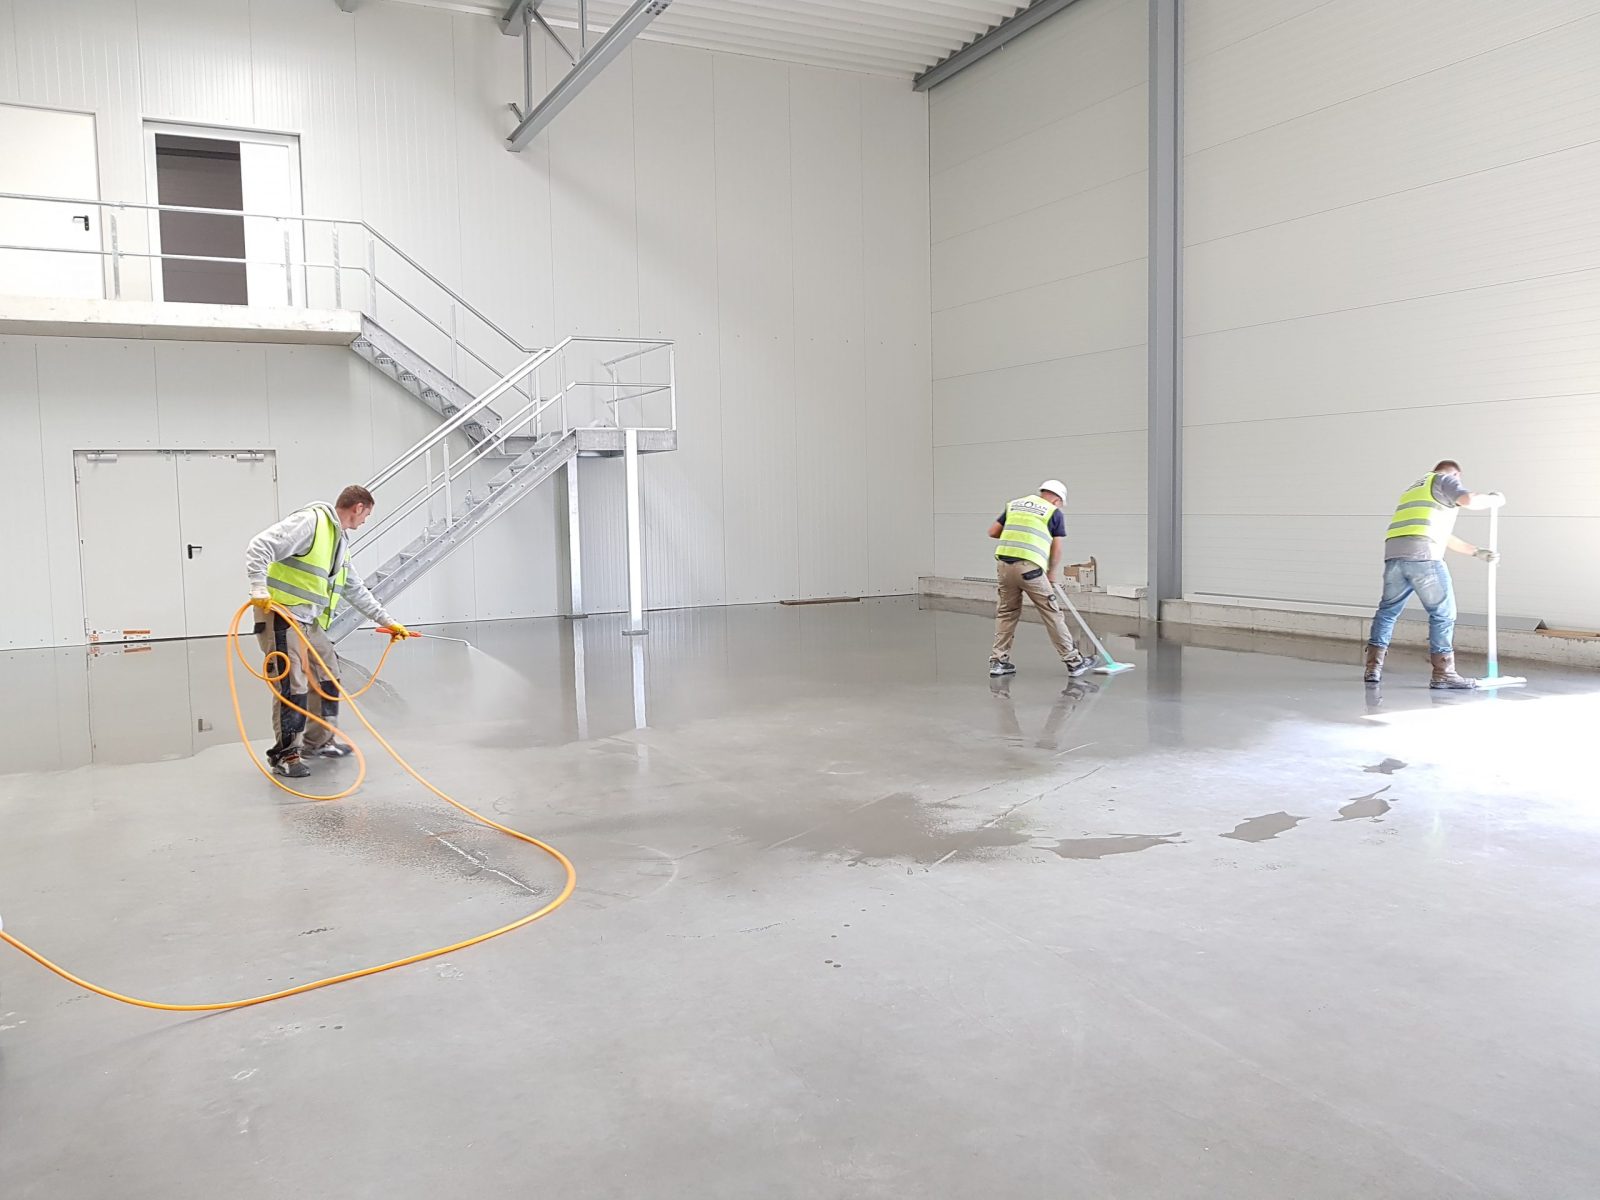 Construction Cleaning services